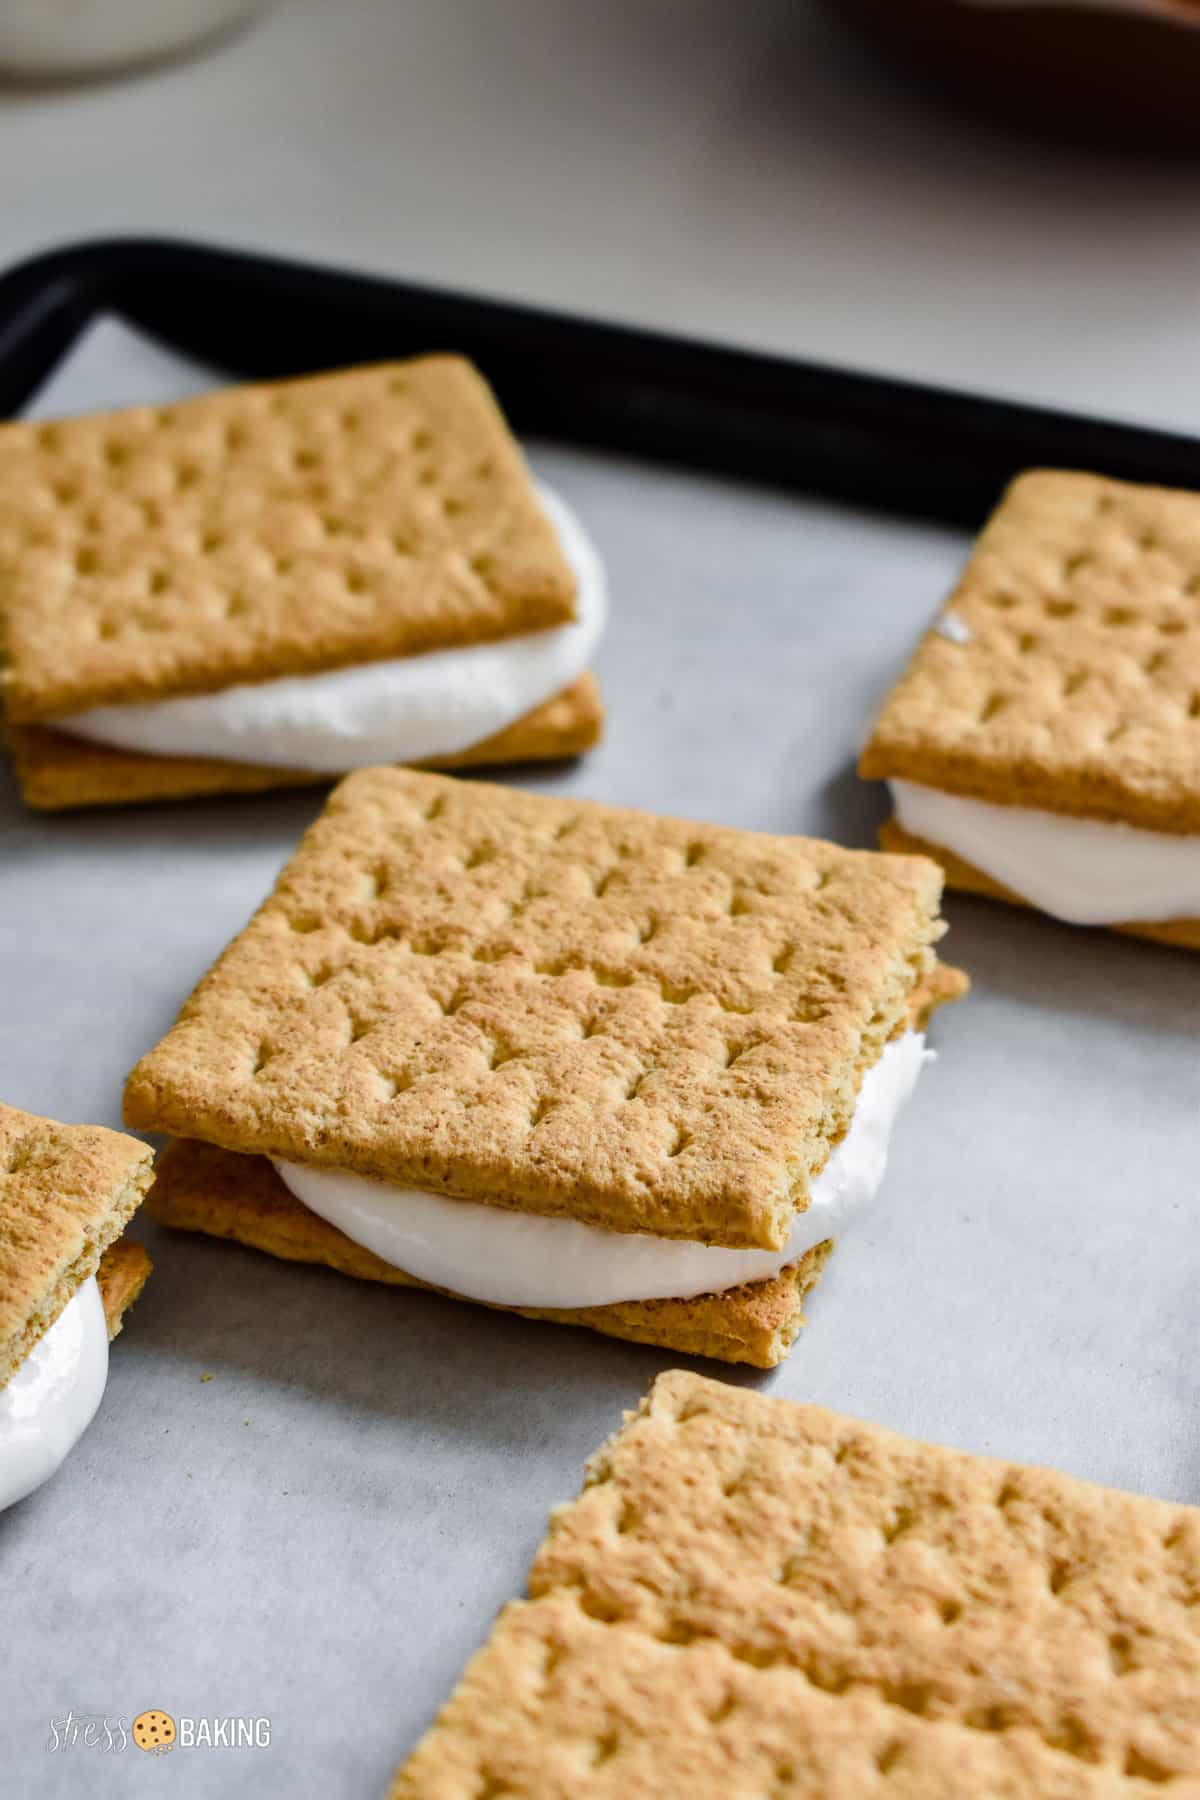 Marshmallow fluff sandwiched between two graham crackers on parchment paper on a baking sheet